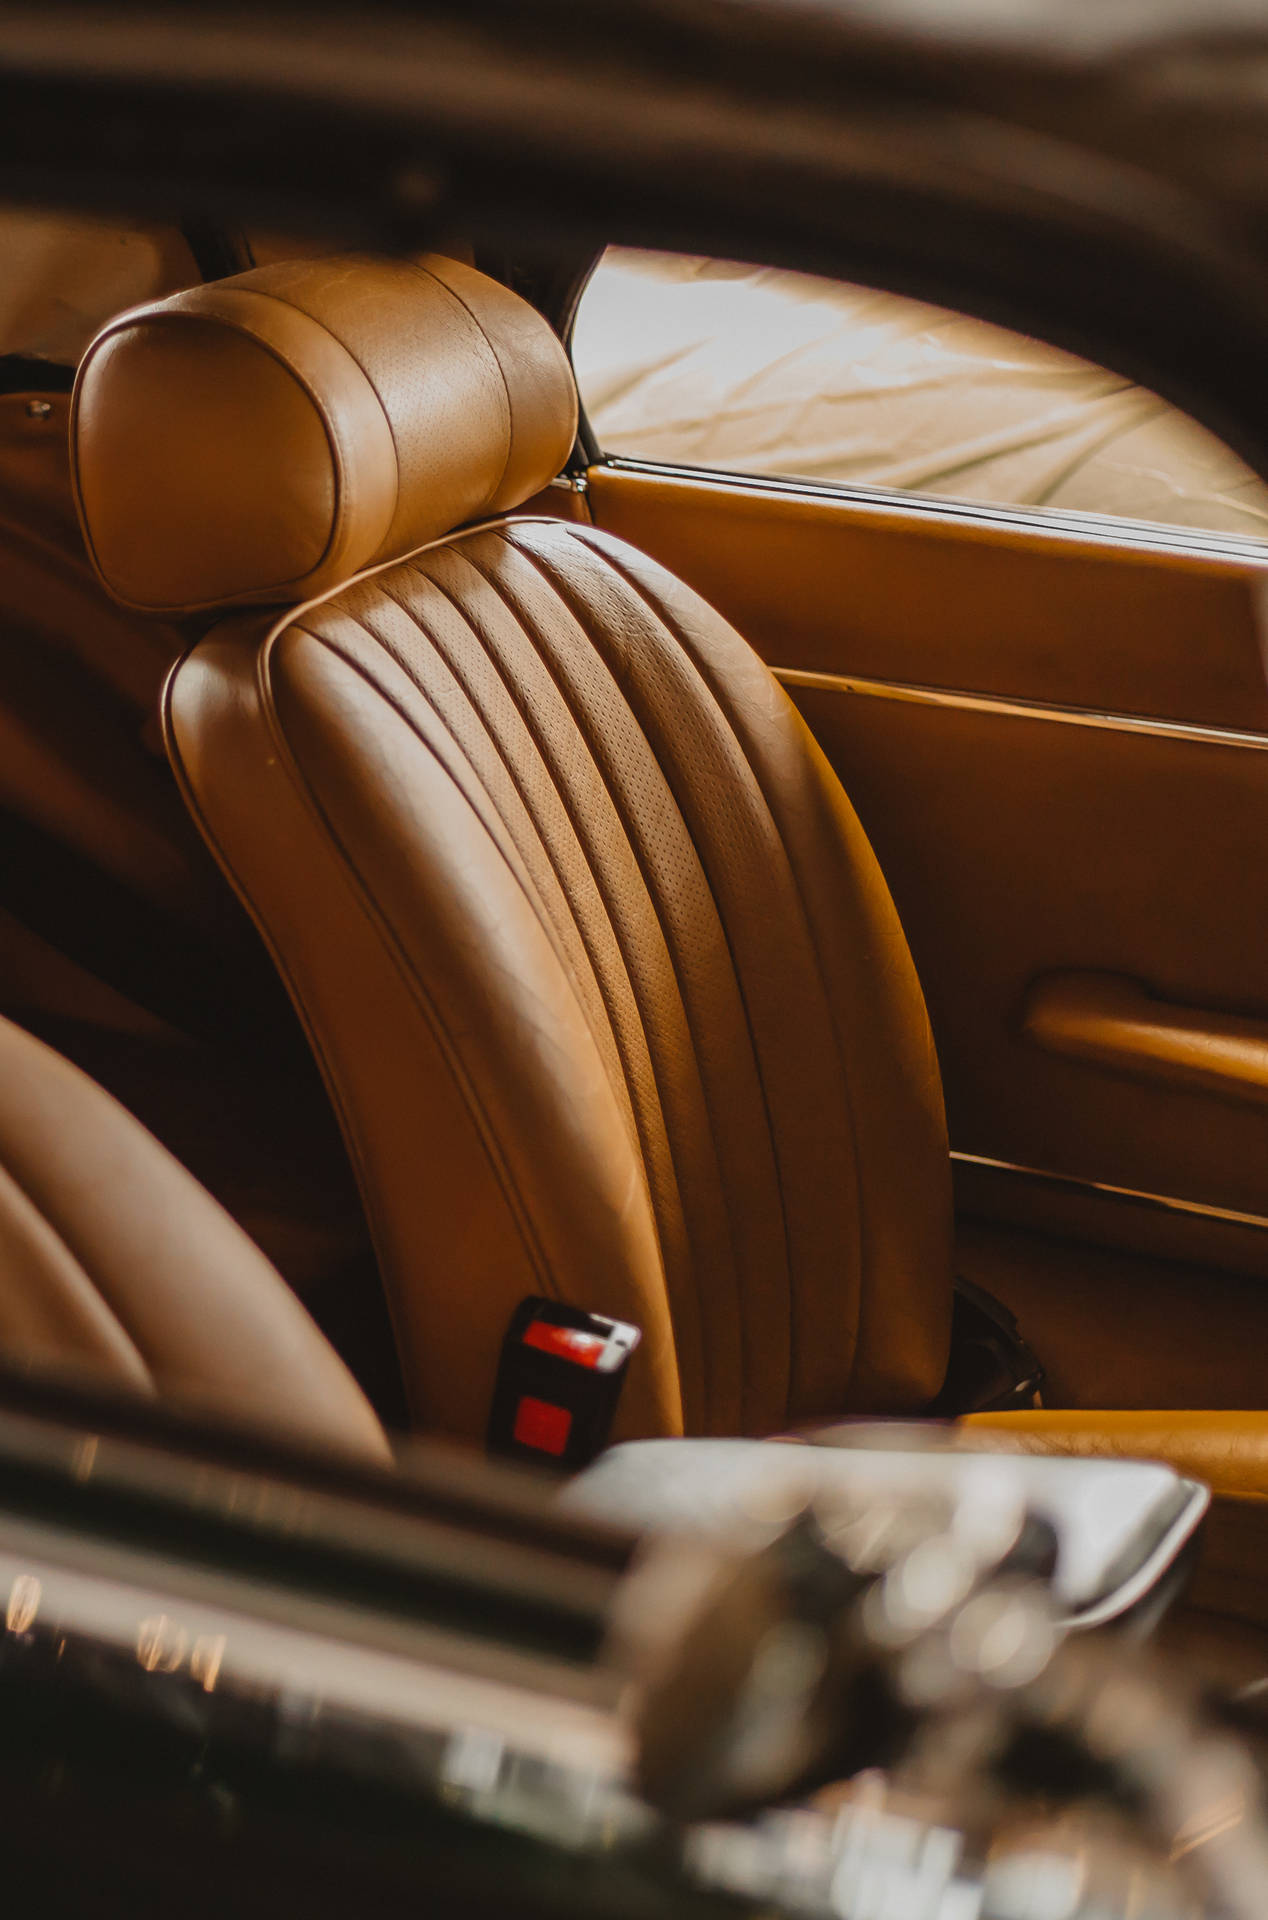 Caption: Luxurious Brown Car Seats Background For Iphone Background